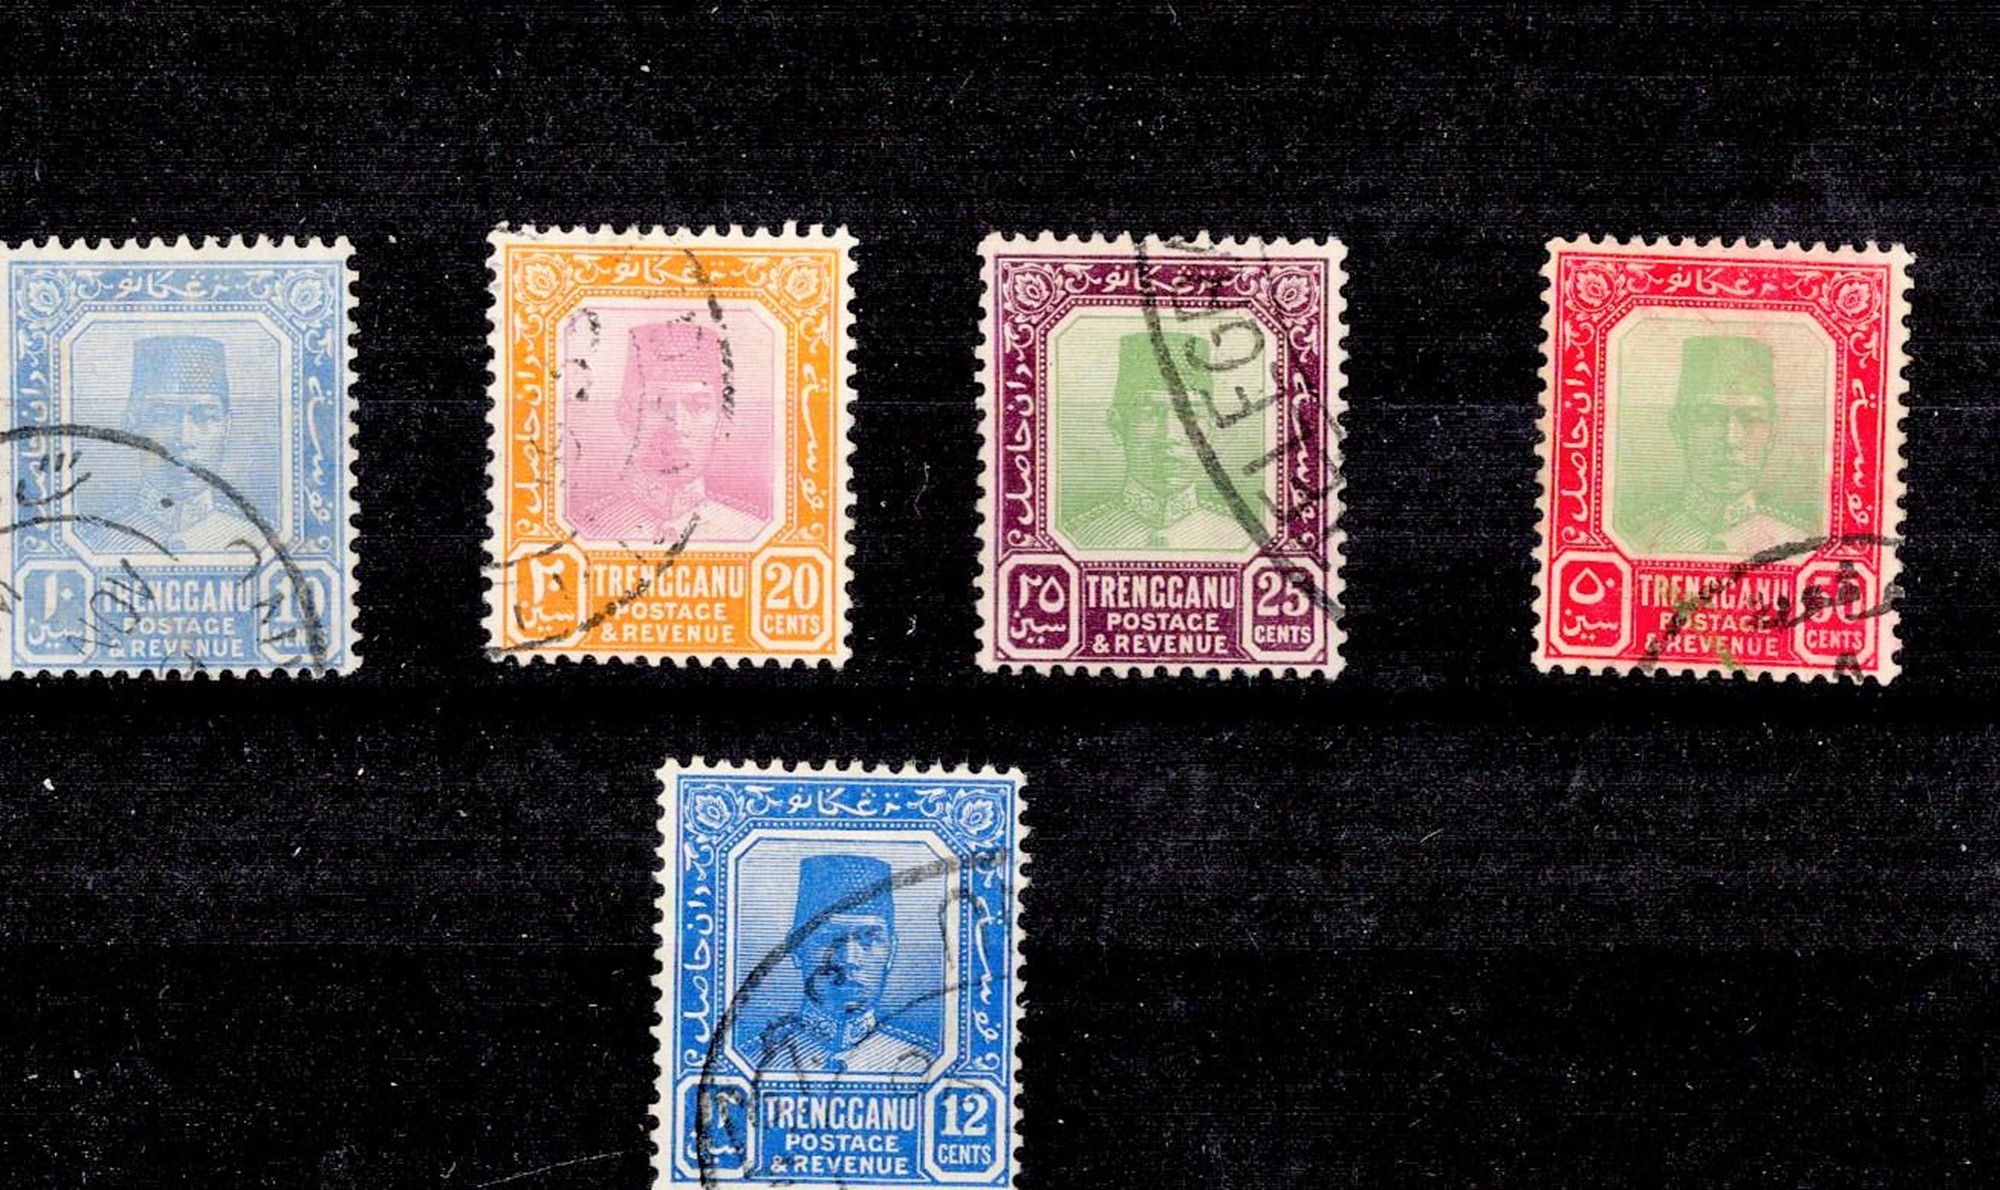 Terengganu Pre 1936 5 Stamps. Good condition. We combine postage on multiple winning lots and can - Image 2 of 3